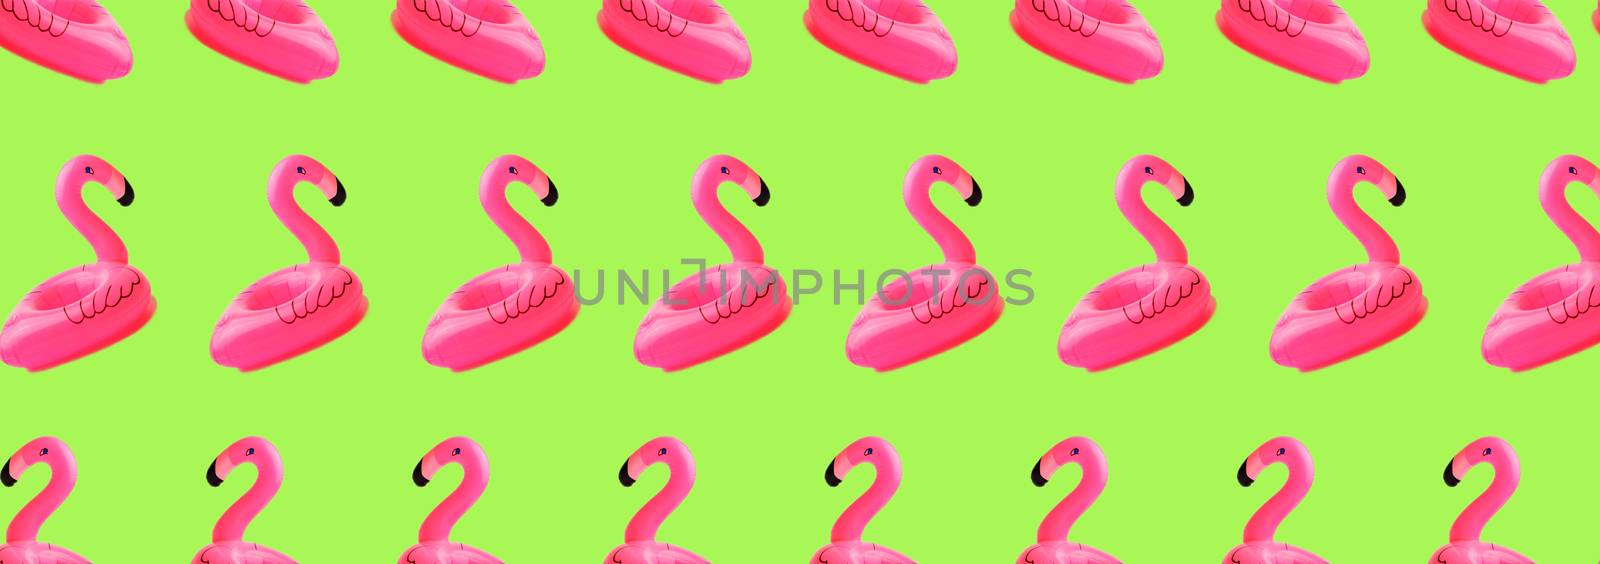 Creative concept of beach and summer vacation.Seamless pattern from inflatable pink mini flamingos on a green background.Floating inflatable flamingo. Flamingo Trend Inflatable Toy. Summer background by Alla_Morozova93